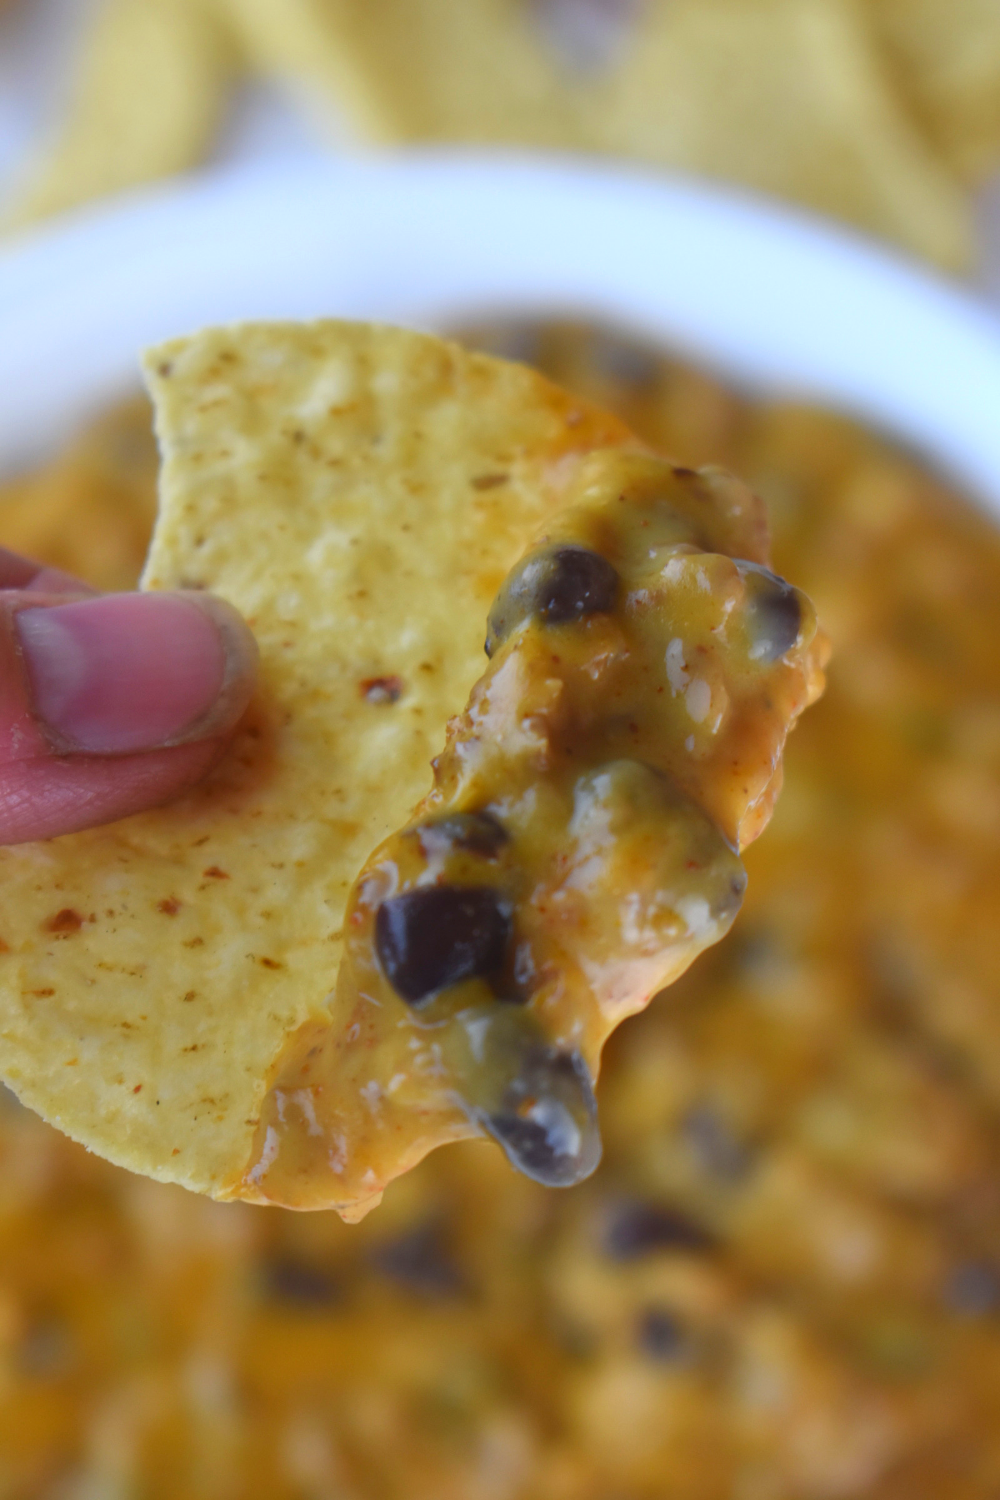 Velveeta Cheese Dip with Beans is the perfect game day recipe.  This cheesy Queso dip is taco flavored and full of ground beef and black beans. Serve with tortilla chips for the win!